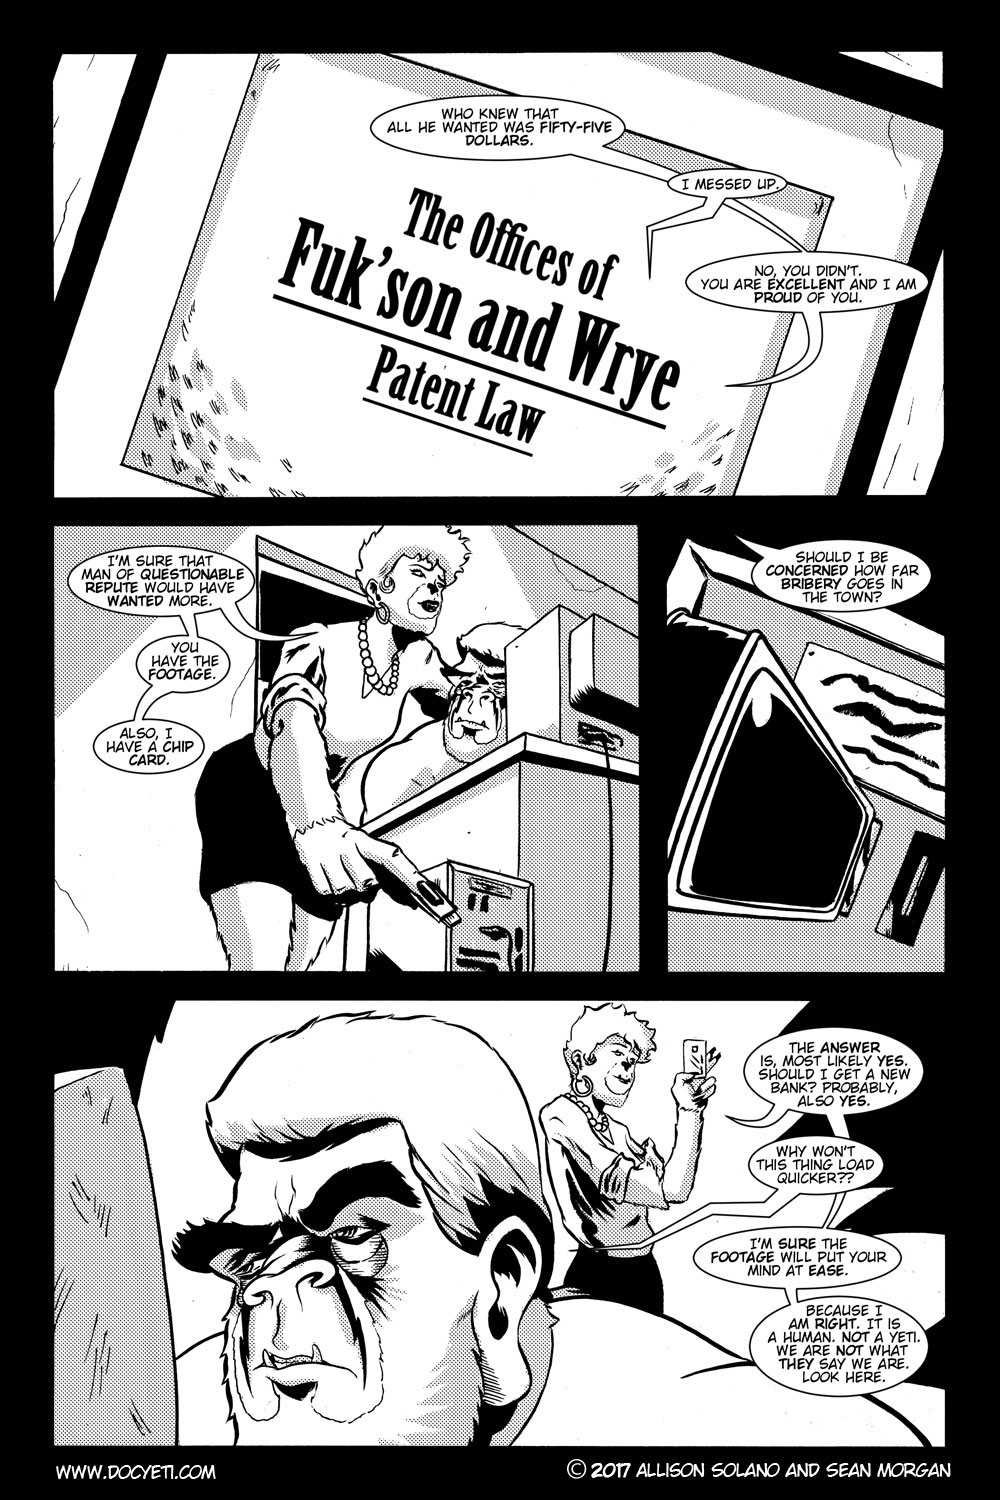 This Yeti for Hire! or the Yeti with the Lace Kerchief! Issue 2 pg.10